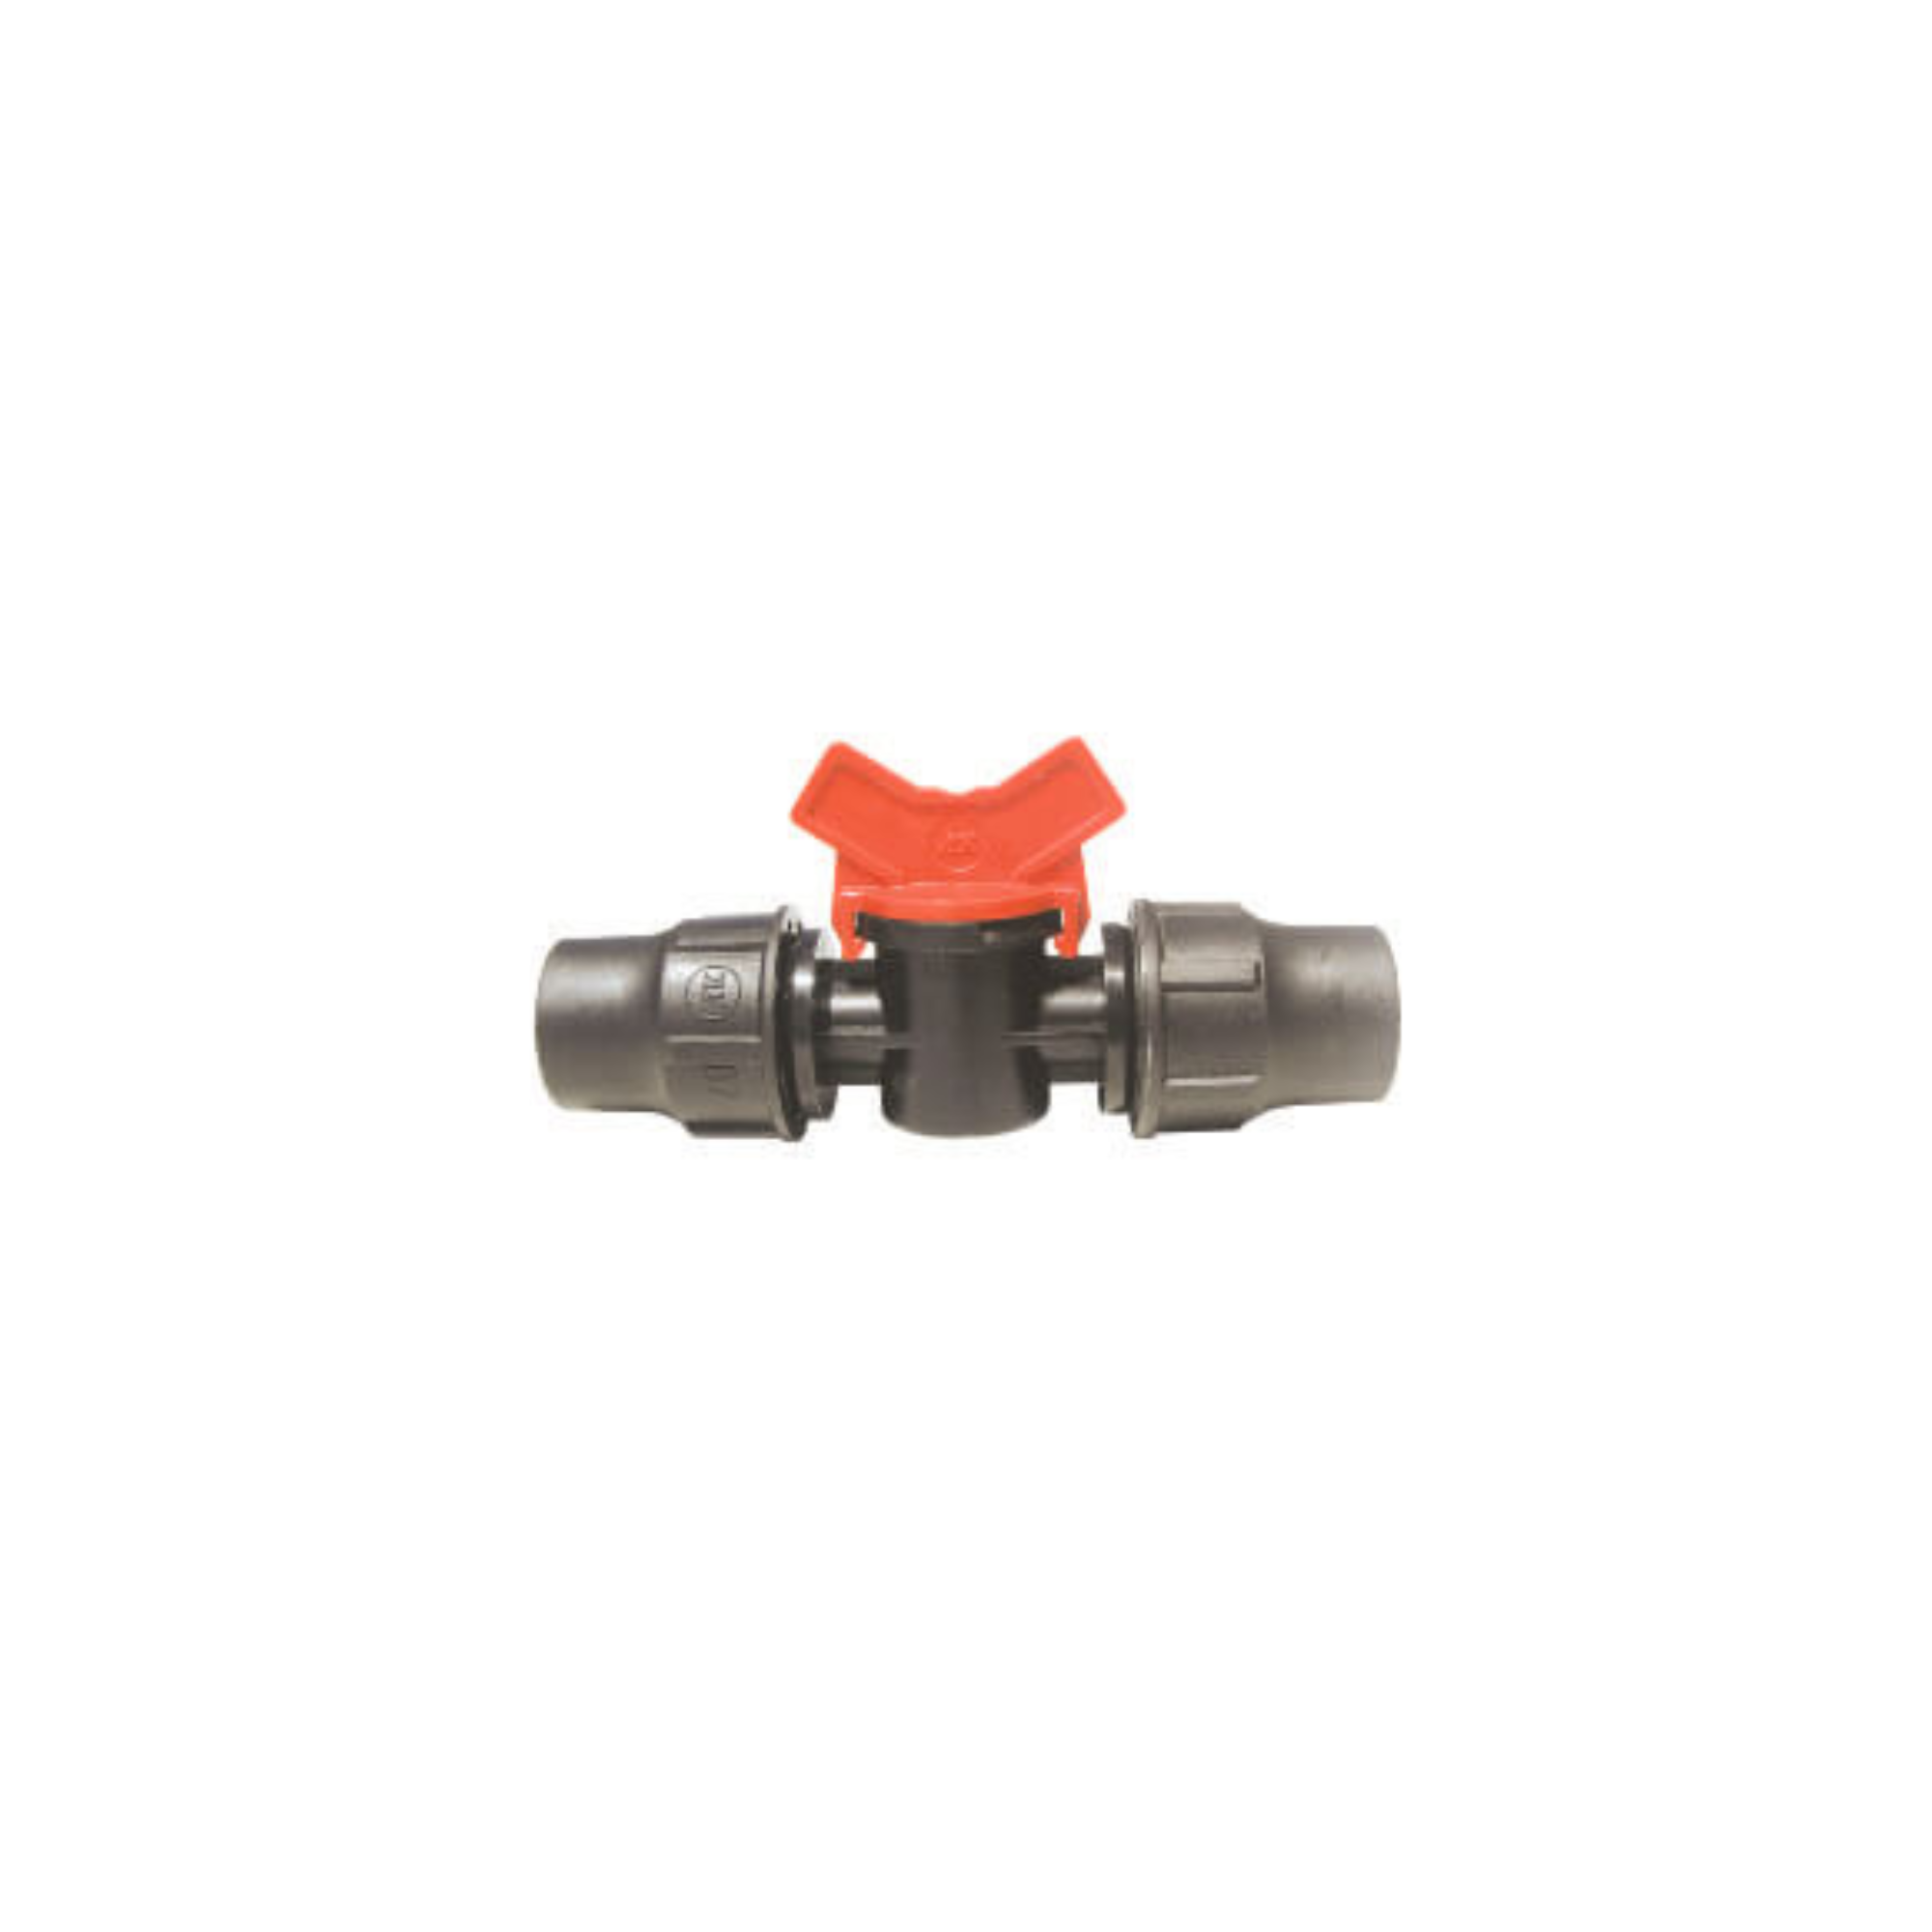 Barbed Inline Manual Valve for 16mm outside diameter (13.5mm ID) drip pipe